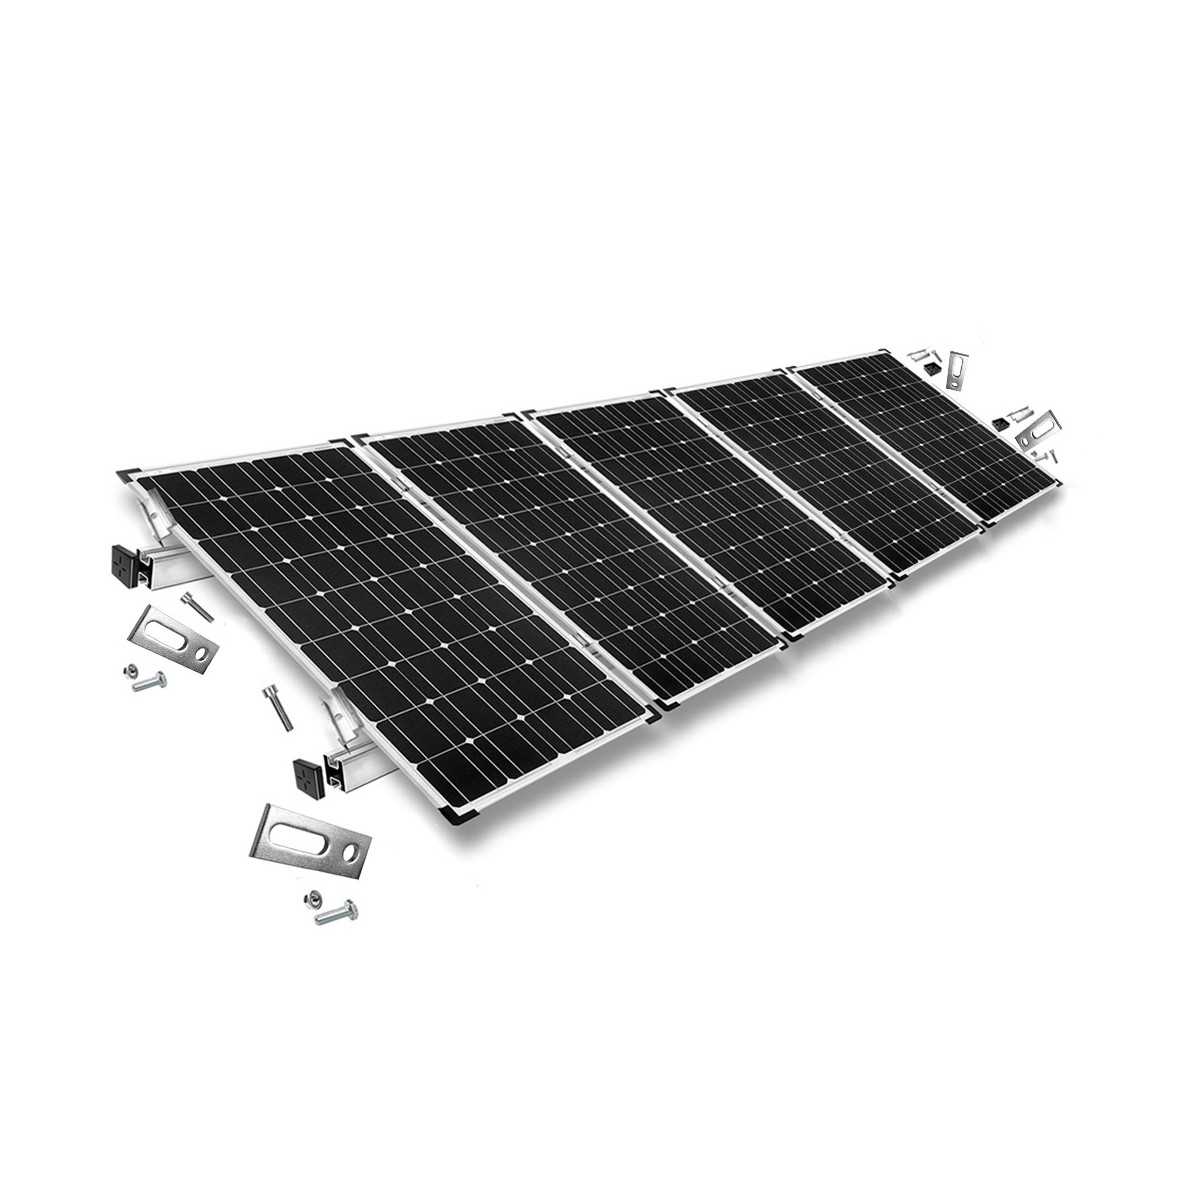 Mounting kit h30 with roof studs for pitched roof 5 solar panels frame 30 mm